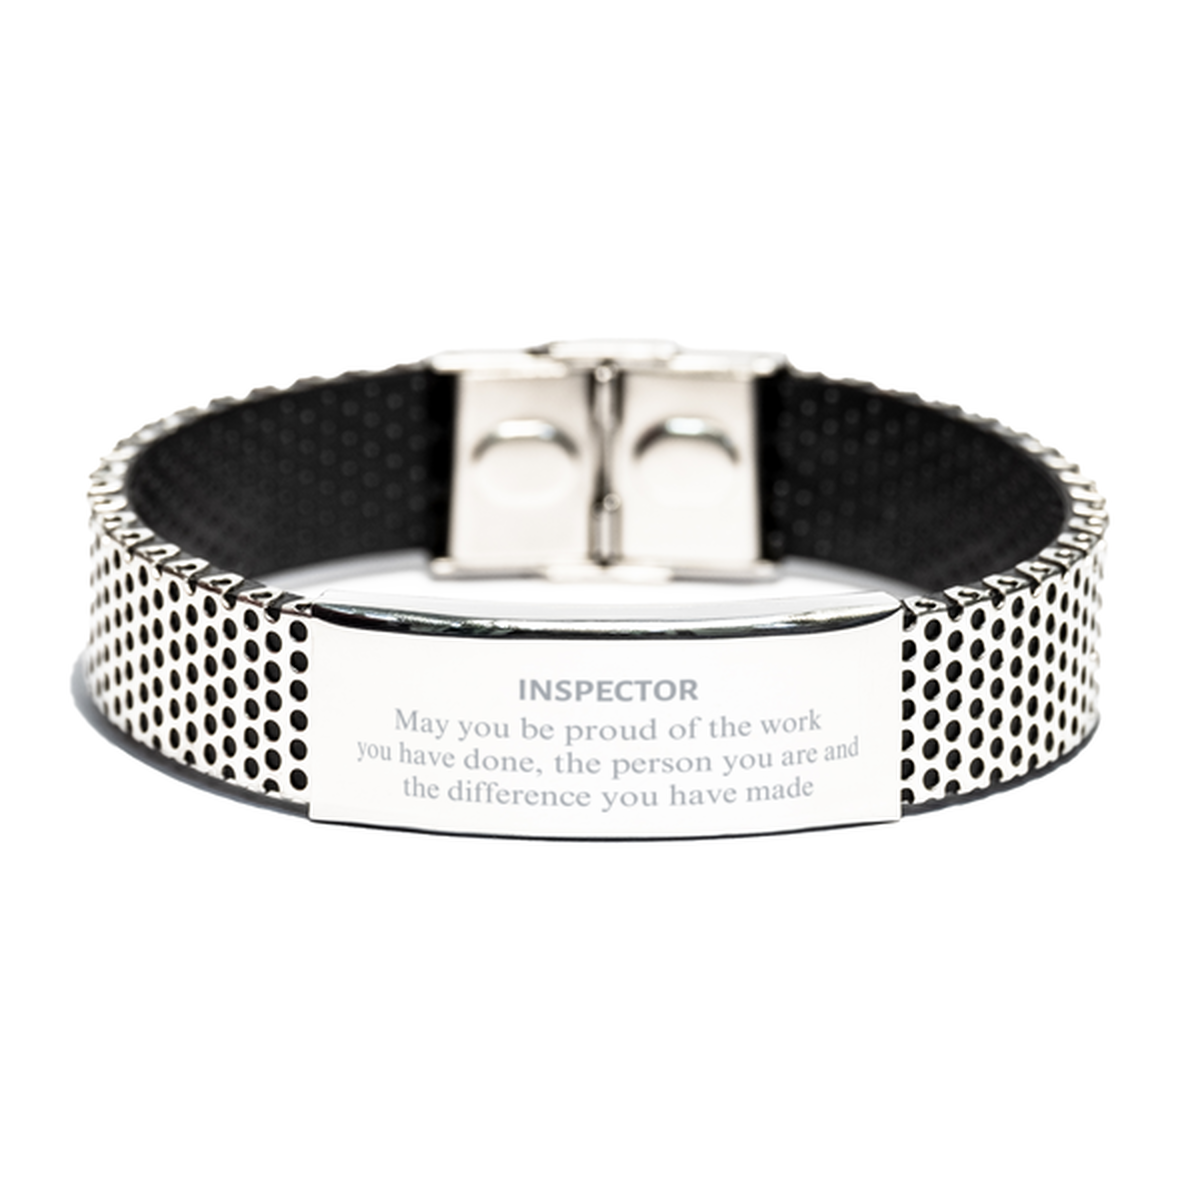 Inspector May you be proud of the work you have done, Retirement Inspector Stainless Steel Bracelet for Colleague Appreciation Gifts Amazing for Inspector